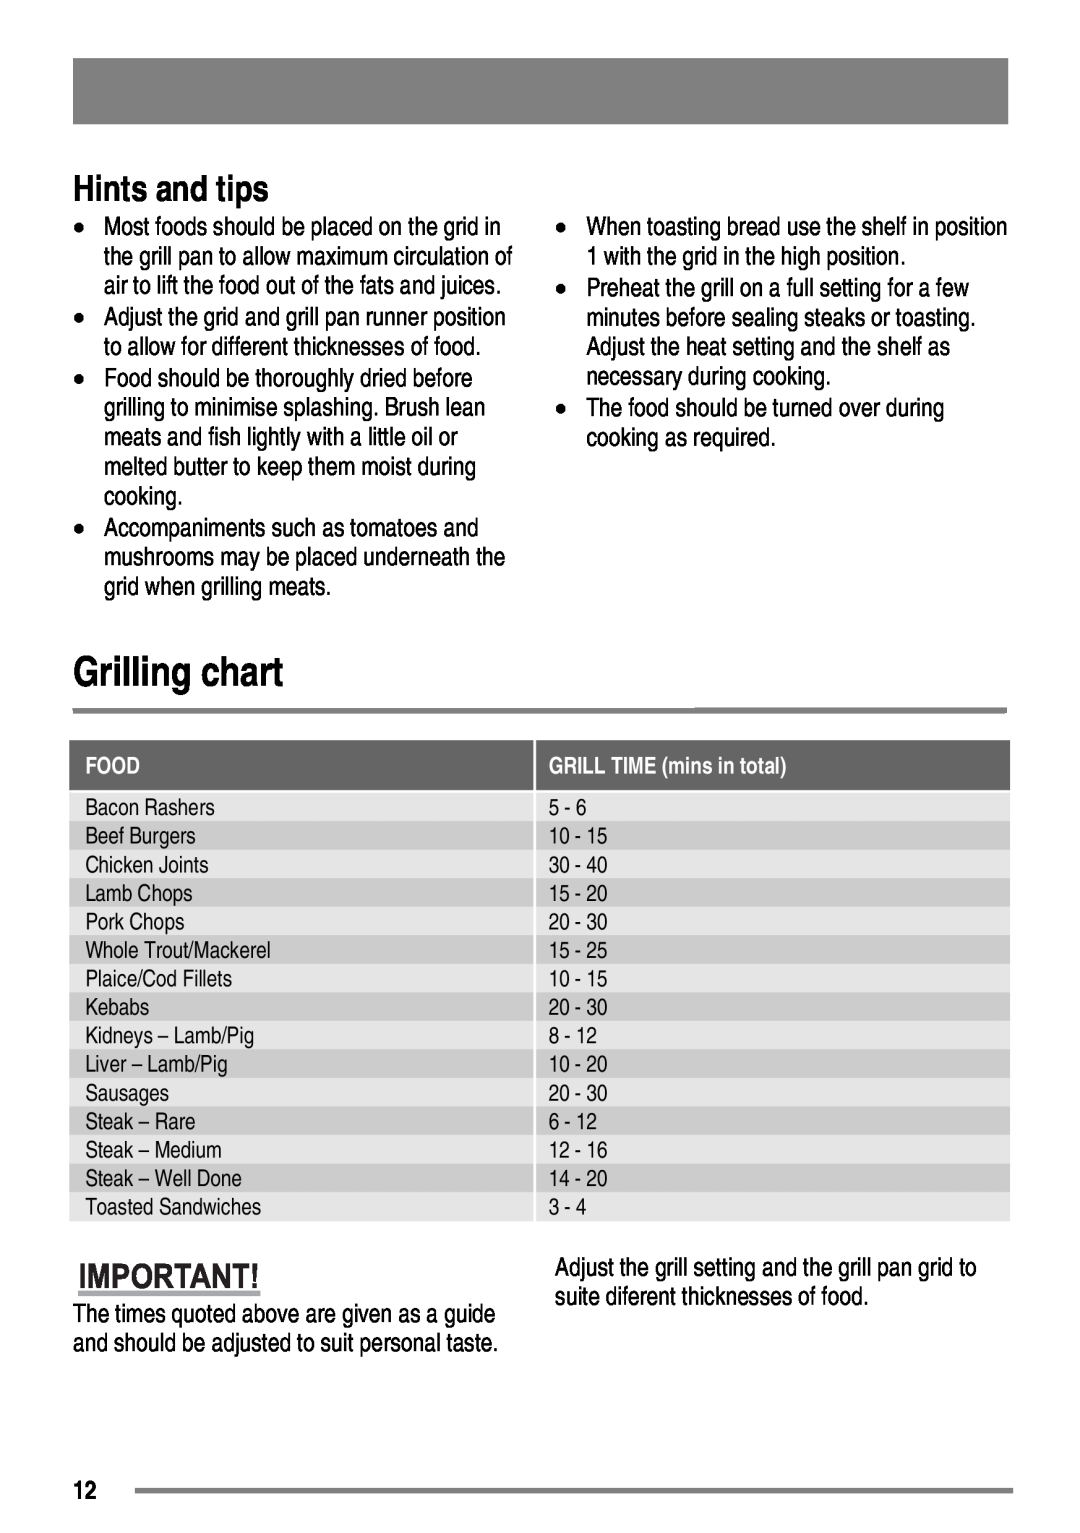 Zanussi ZKG6010 user manual Grilling chart, Hints and tips, Food, GRILL TIME mins in total 